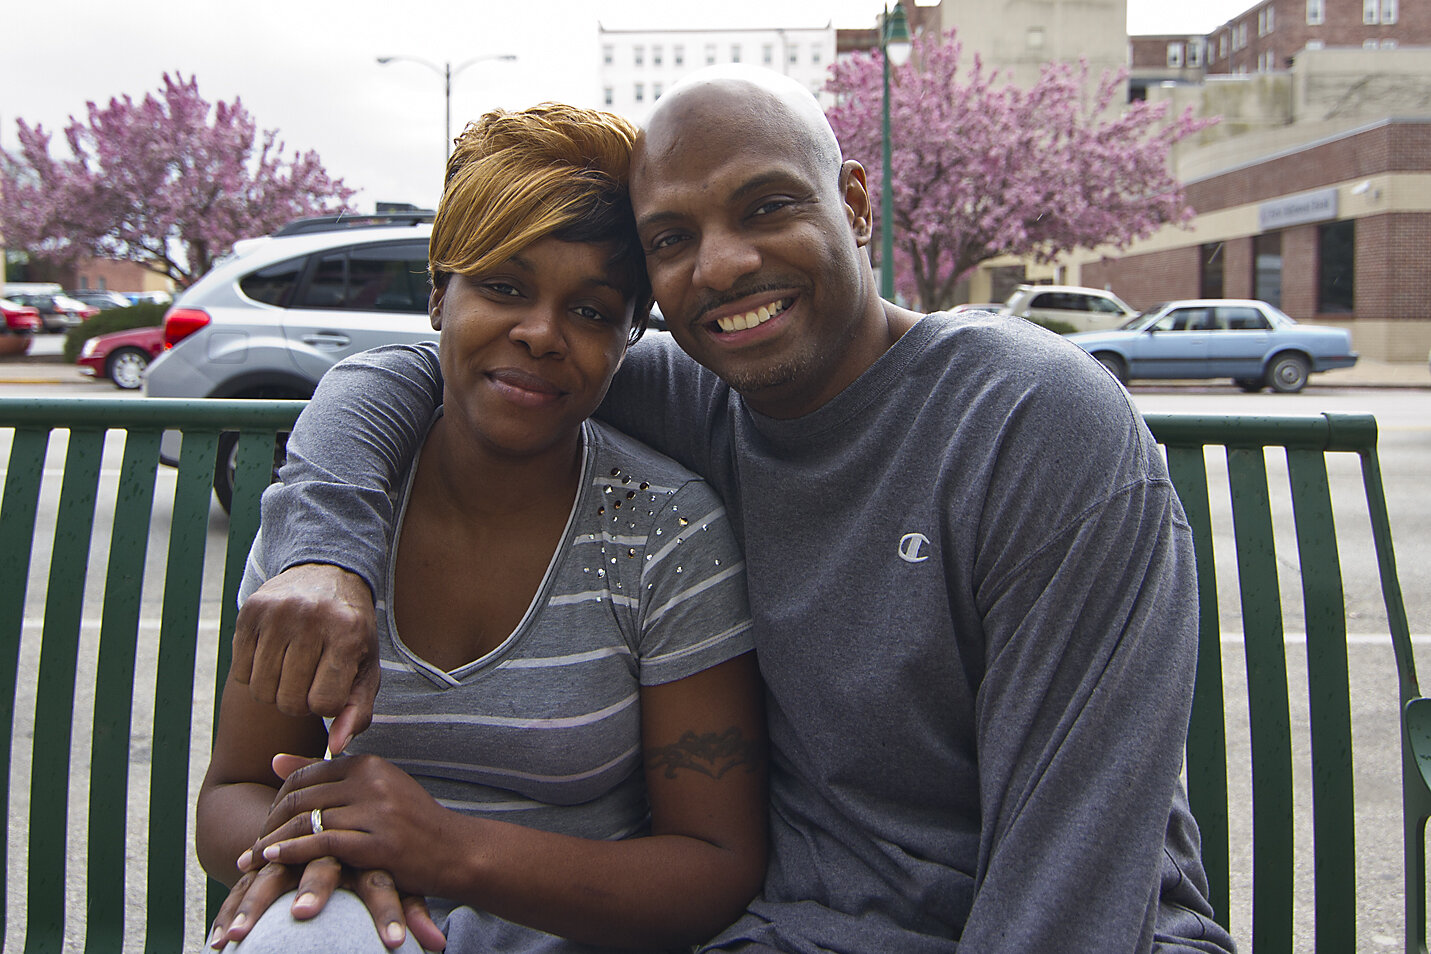  Ricquia LaNore and her brother, Eddie Bolden, share a moment Thursday, April 21, 2016, in downtown Galesburg, Illinois. Bolden, 46, spent the last 22 years in a prison for a double murder in Chicago that it was determined he didn’t commit. Now that 